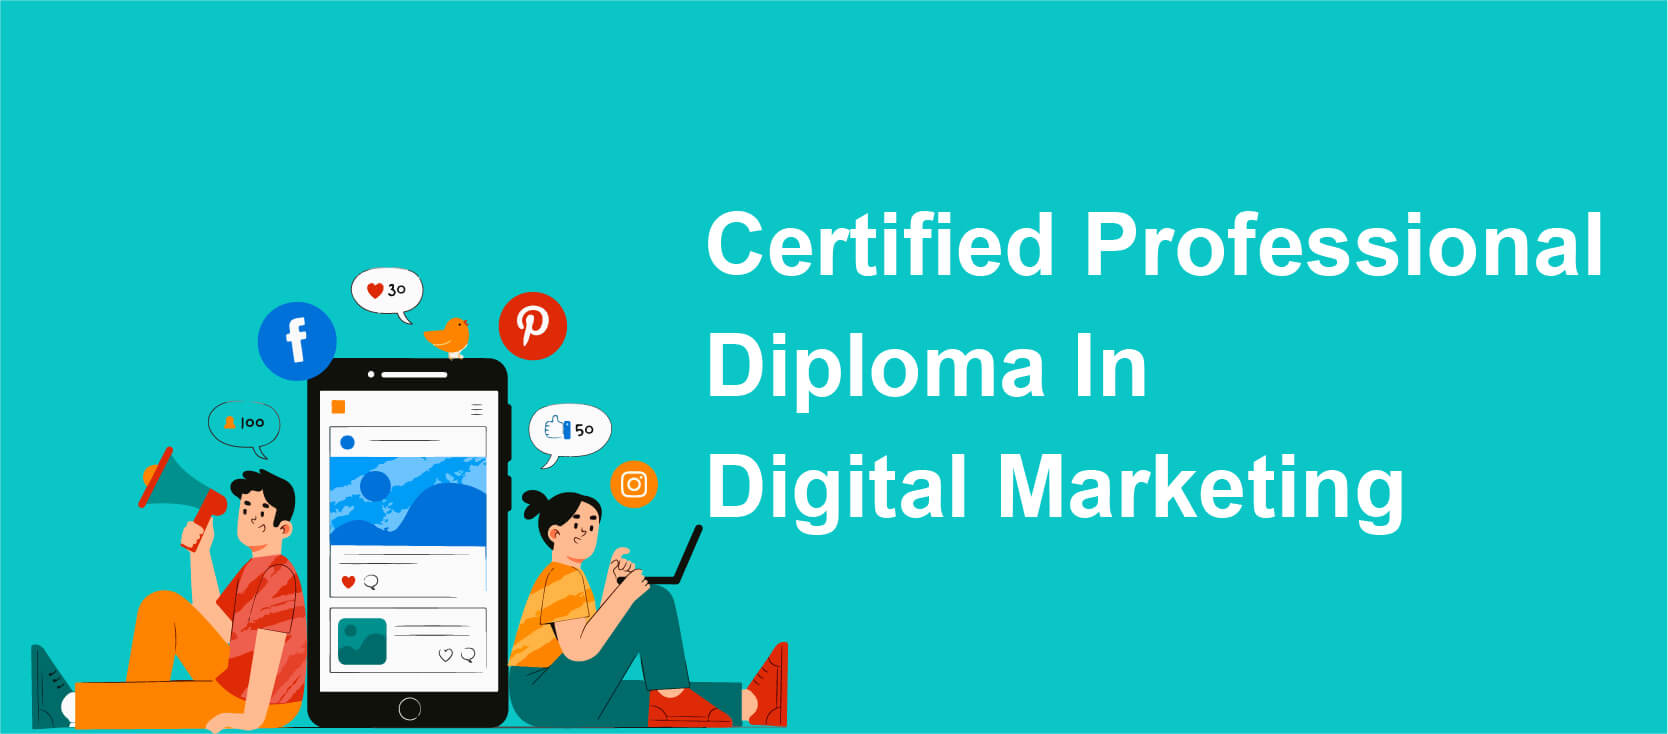 Professional Diploma in Digital Marketing Course